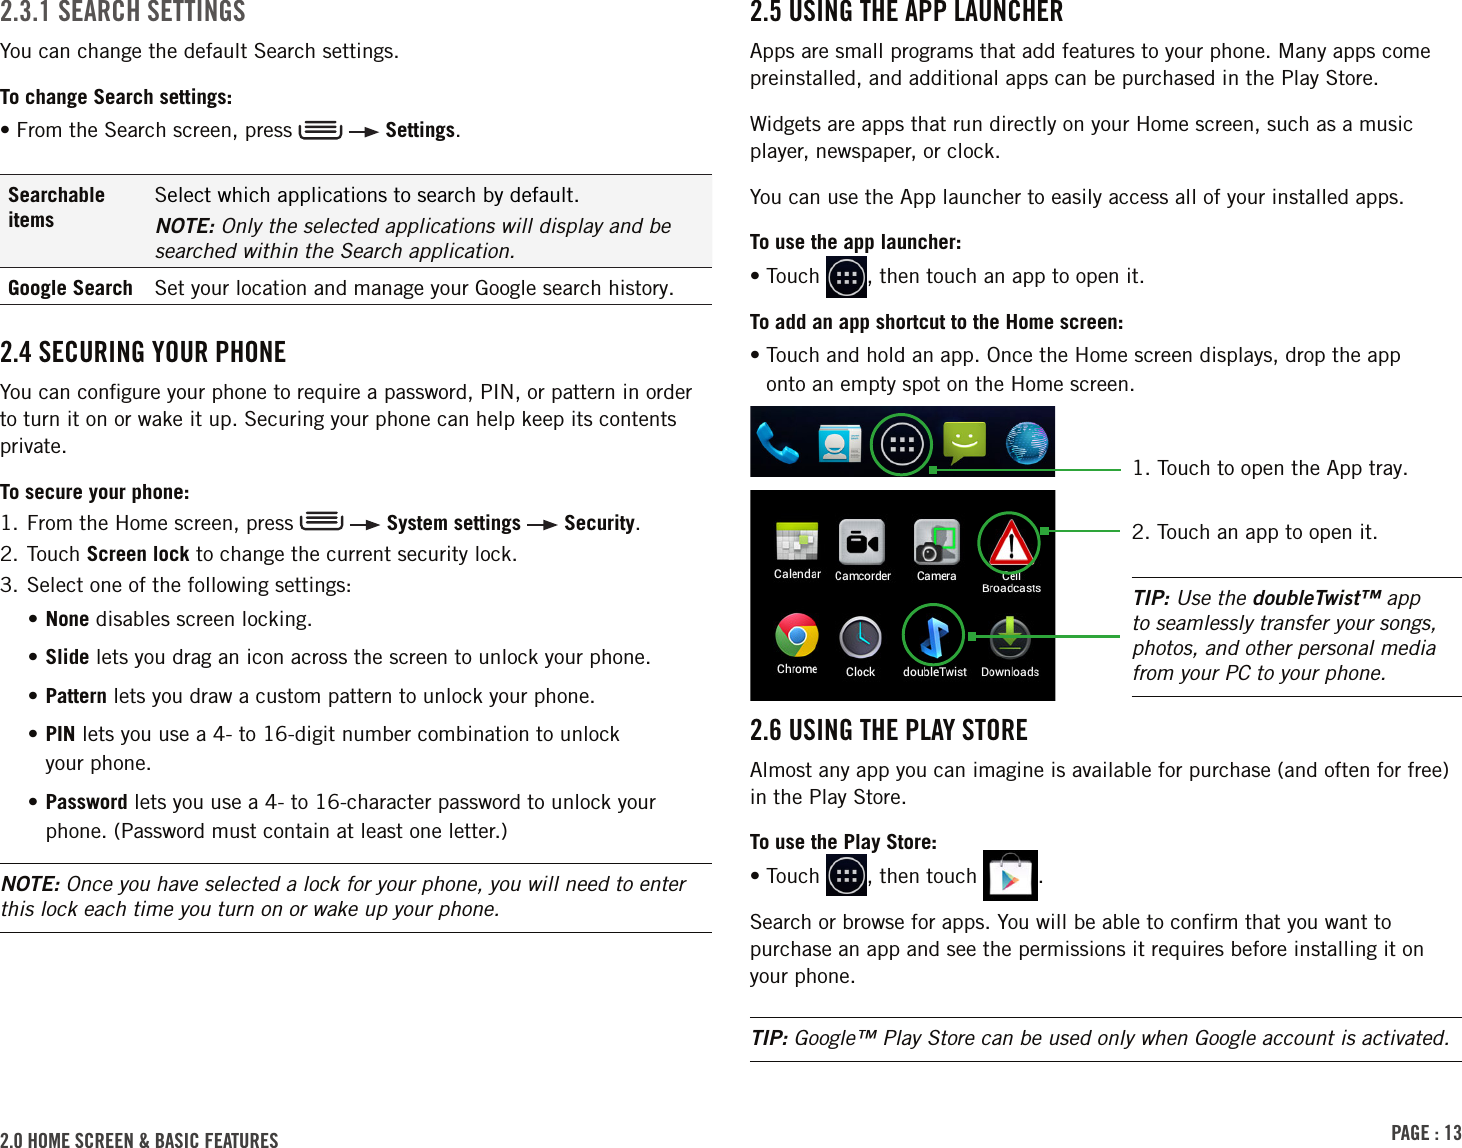 PAGE : 132.0 hoME scrEEn &amp; BAsic FEAturEs 2.5 usinG thE APP lAunchErApps are small programs that add features to your phone. Many apps come preinstalled, and additional apps can be purchased in the Play Store.Widgets are apps that run directly on your Home screen, such as a music player, newspaper, or clock.You can use the App launcher to easily access all of your installed apps. To use the app launcher:• Touch  , then touch an app to open it.To add an app shortcut to the Home screen:•  Touch and hold an app. Once the Home screen displays, drop the app  onto an empty spot on the Home screen.2.6 usinG thE PlAY storEAlmost any app you can imagine is available for purchase (and often for free) in the Play Store.To use the Play Store:• Touch  , then touch  .Search or browse for apps. You will be able to conﬁrm that you want to purchase an app and see the permissions it requires before installing it on your phone.TIP: Google™ Play Store can be used only when Google account is activated.2.3.1 sEArch sEttinGsYou can change the default Search settings.To change Search settings:• From the Search screen, press     Settings.Searchable itemsSelect which applications to search by default.NOTE: Only the selected applications will display and be searched within the Search application.Google Search Set your location and manage your Google search history.2.4 sEcurinG Your PhonEYou can conﬁgure your phone to require a password, PIN, or pattern in order to turn it on or wake it up. Securing your phone can help keep its contents private. To secure your phone:1.  From the Home screen, press     System settings   Security. 2.  Touch  Screen lock to change the current security lock.3. Select one of the following settings:• None disables screen locking. • Slide lets you drag an icon across the screen to unlock your phone.• Pattern lets you draw a custom pattern to unlock your phone.•  PIN lets you use a 4- to 16-digit number combination to unlock  your phone.•  Password lets you use a 4- to 16-character password to unlock your phone. (Password must contain at least one letter.)NOTE: Once you have selected a lock for your phone, you will need to enter this lock each time you turn on or wake up your phone.TIP: Use the doubleTwist™ app to seamlessly transfer your songs, photos, and other personal media from your PC to your phone.2. Touch an app to open it.1.  Touch to open the App tray.